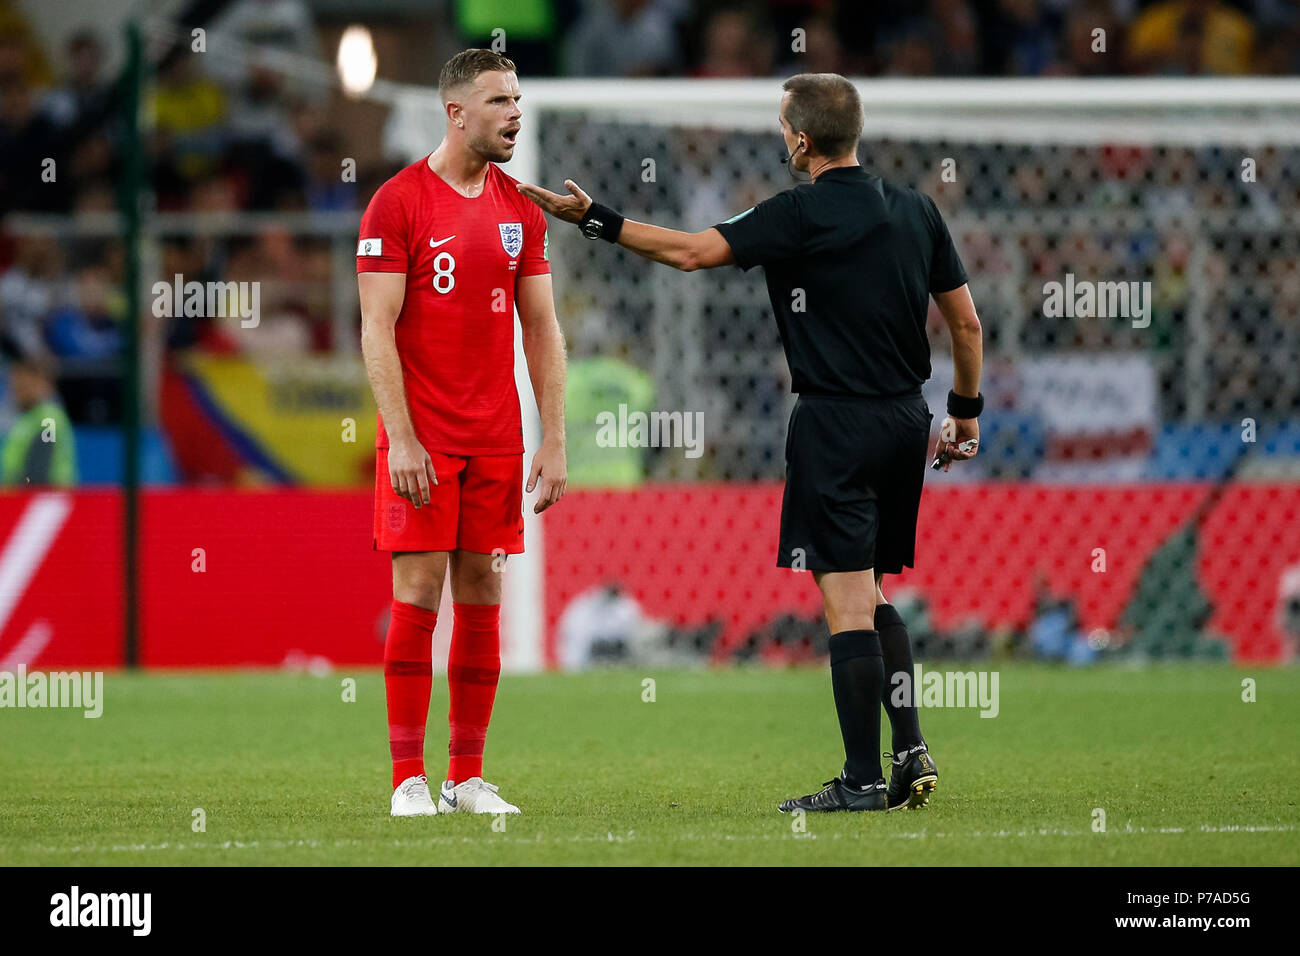 Moscow, Russia. 3rd July, 2018. Jordan Henderson of England contests a decision with referee Mark Geiger during the 2018 FIFA World Cup Round of 16 match between Colombia and England at Spartak Stadium on July 3rd 2018 in Moscow, Russia. (Photo by Daniel Chesterton/phcimages.com) Credit: PHC Images/Alamy Live News Stock Photo